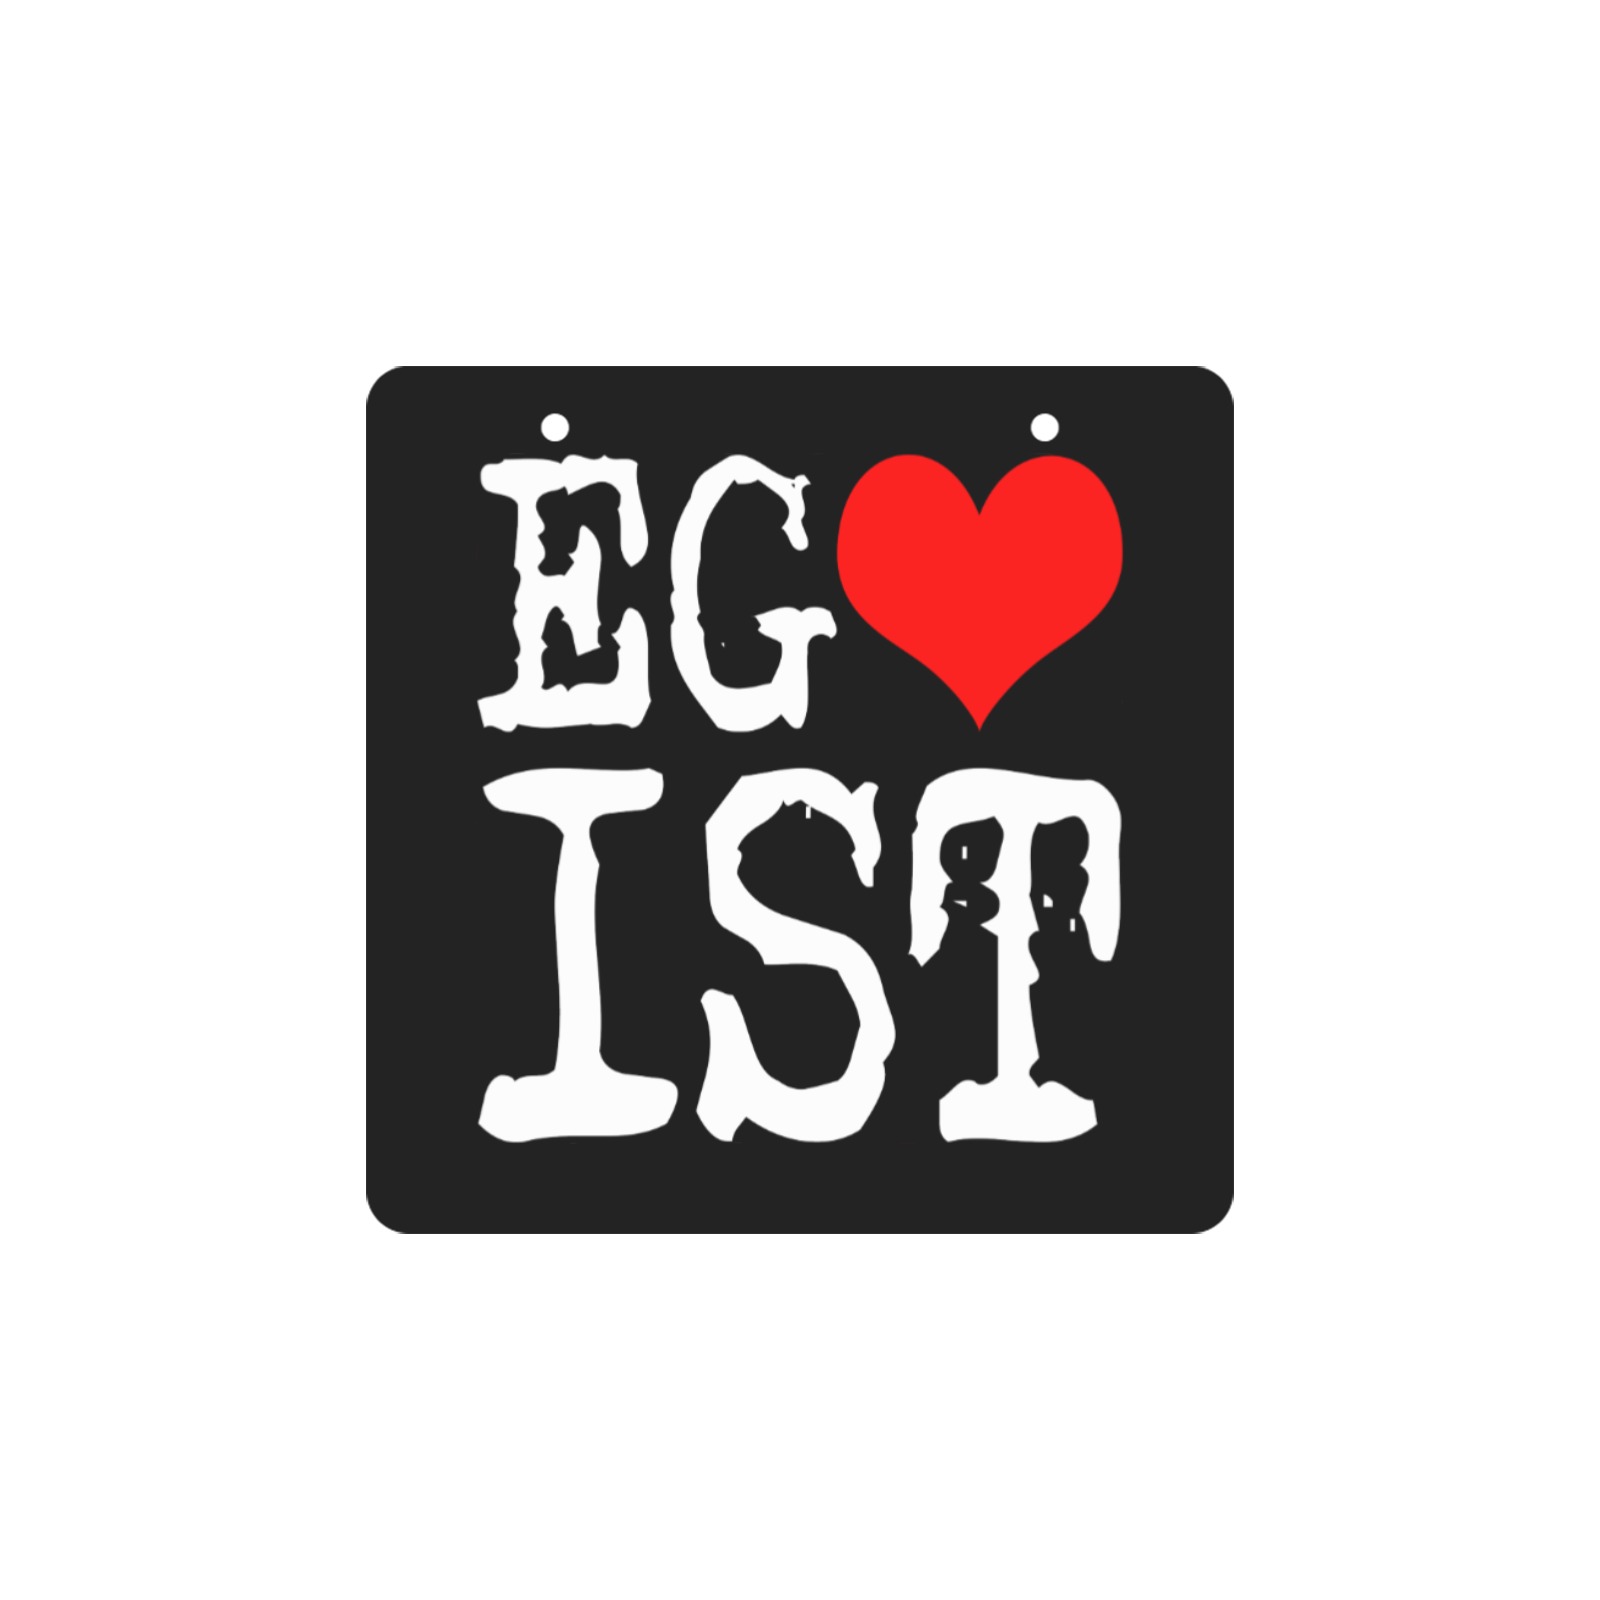 Egoist Red Heart White Funny Cool Laugh Chic Square Wood Door Hanging Sign